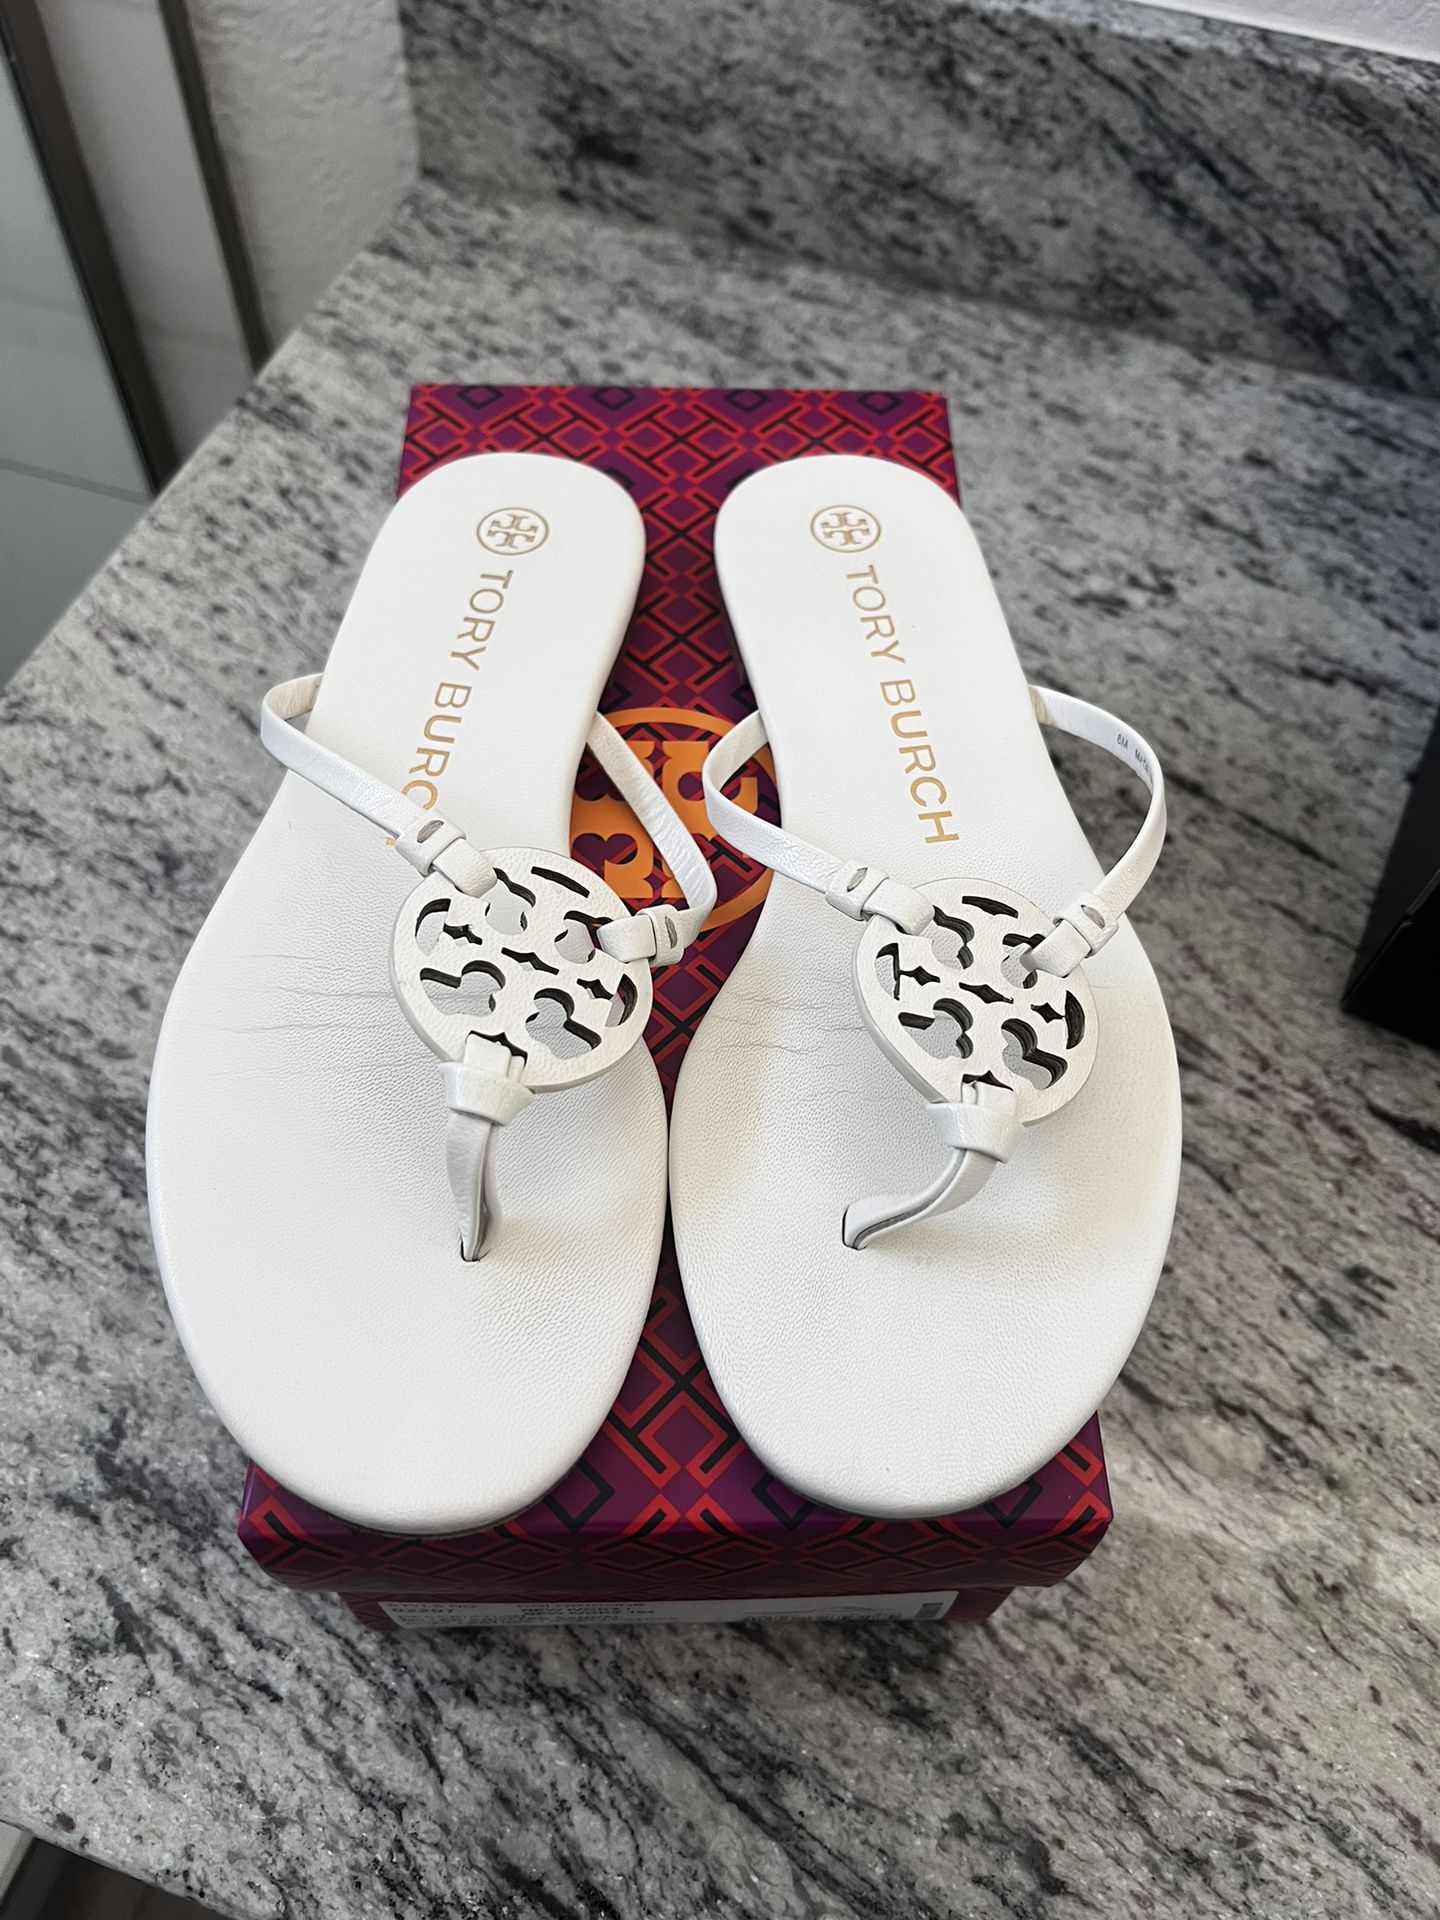 Tory Burch Sandals for Sale in Chandler, AZ - OfferUp